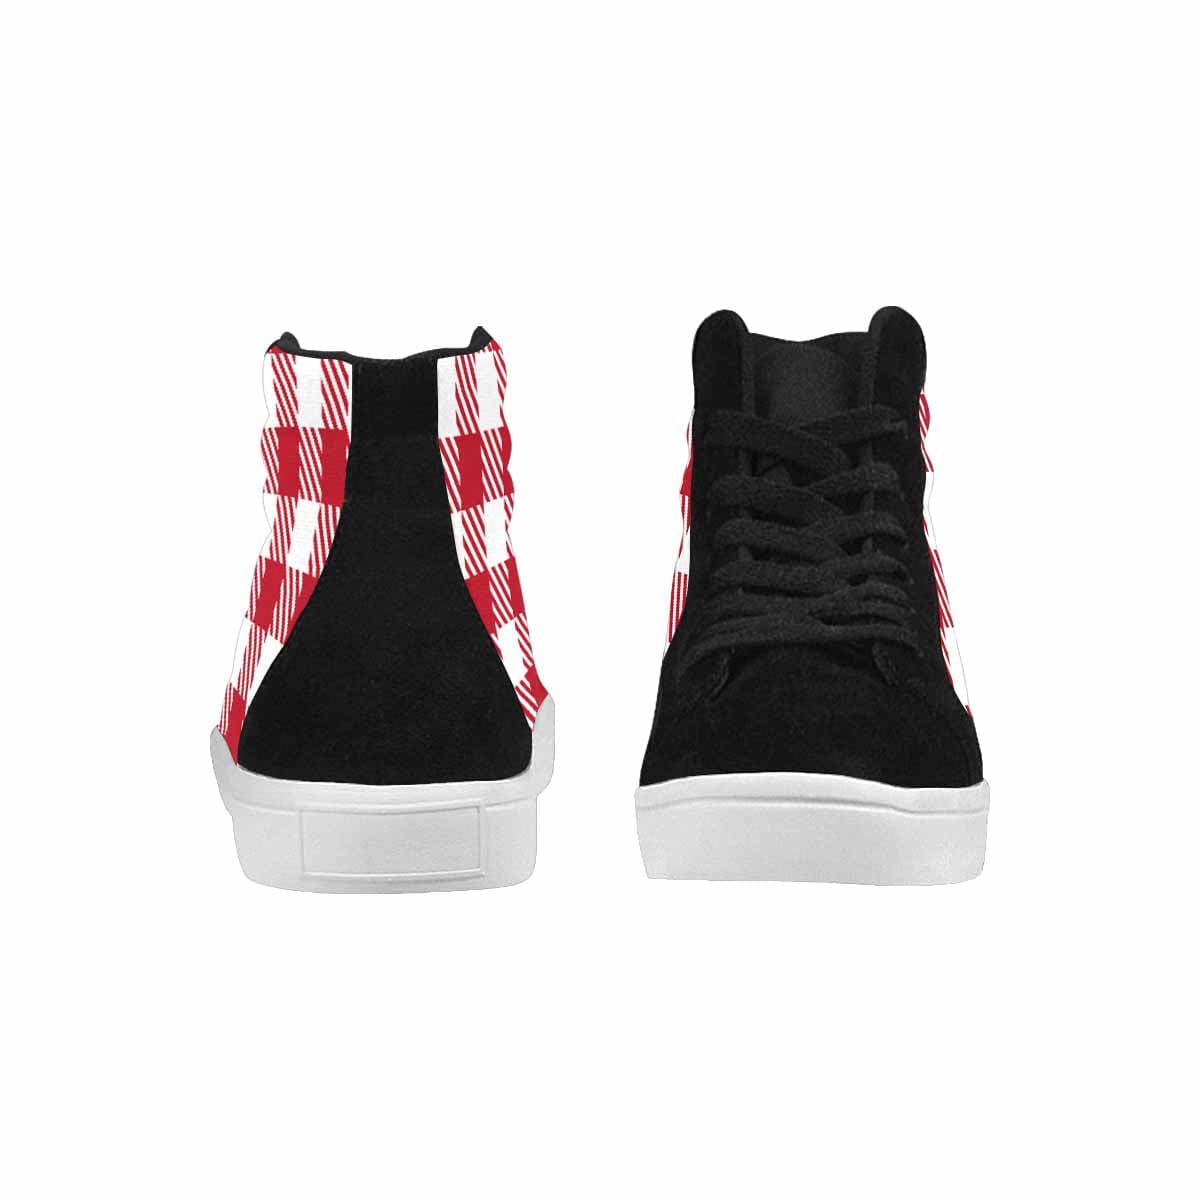 Uniquely You Sneakers for Men, Red and White Buffalo Plaid - High Top Sports Shoes - Scarvesnthangs